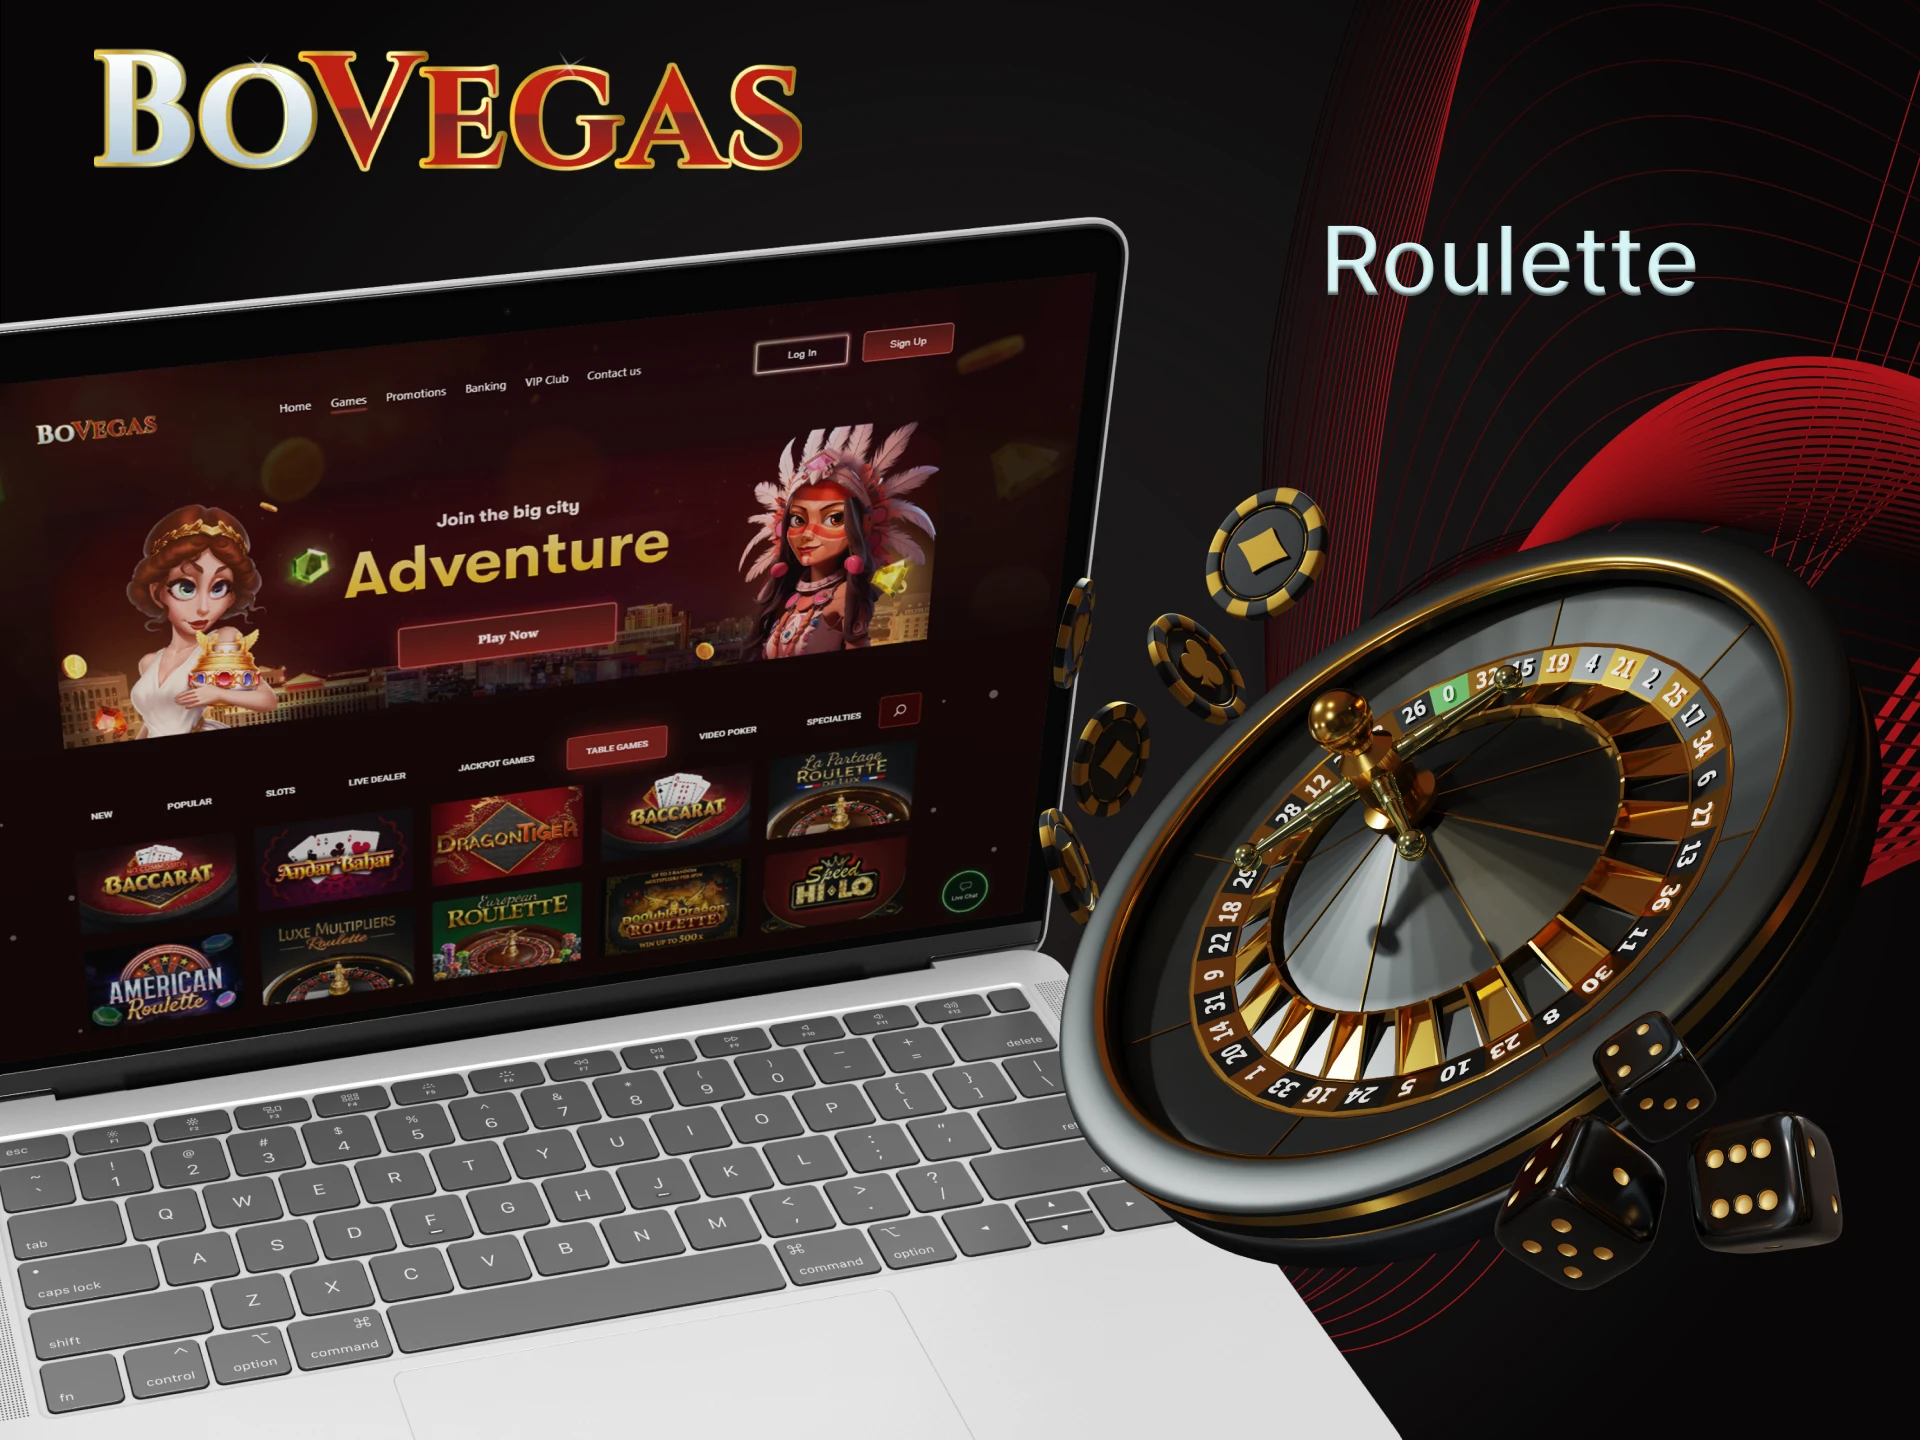 Play the Roulette game on BoVegas Casino just by picking the number.